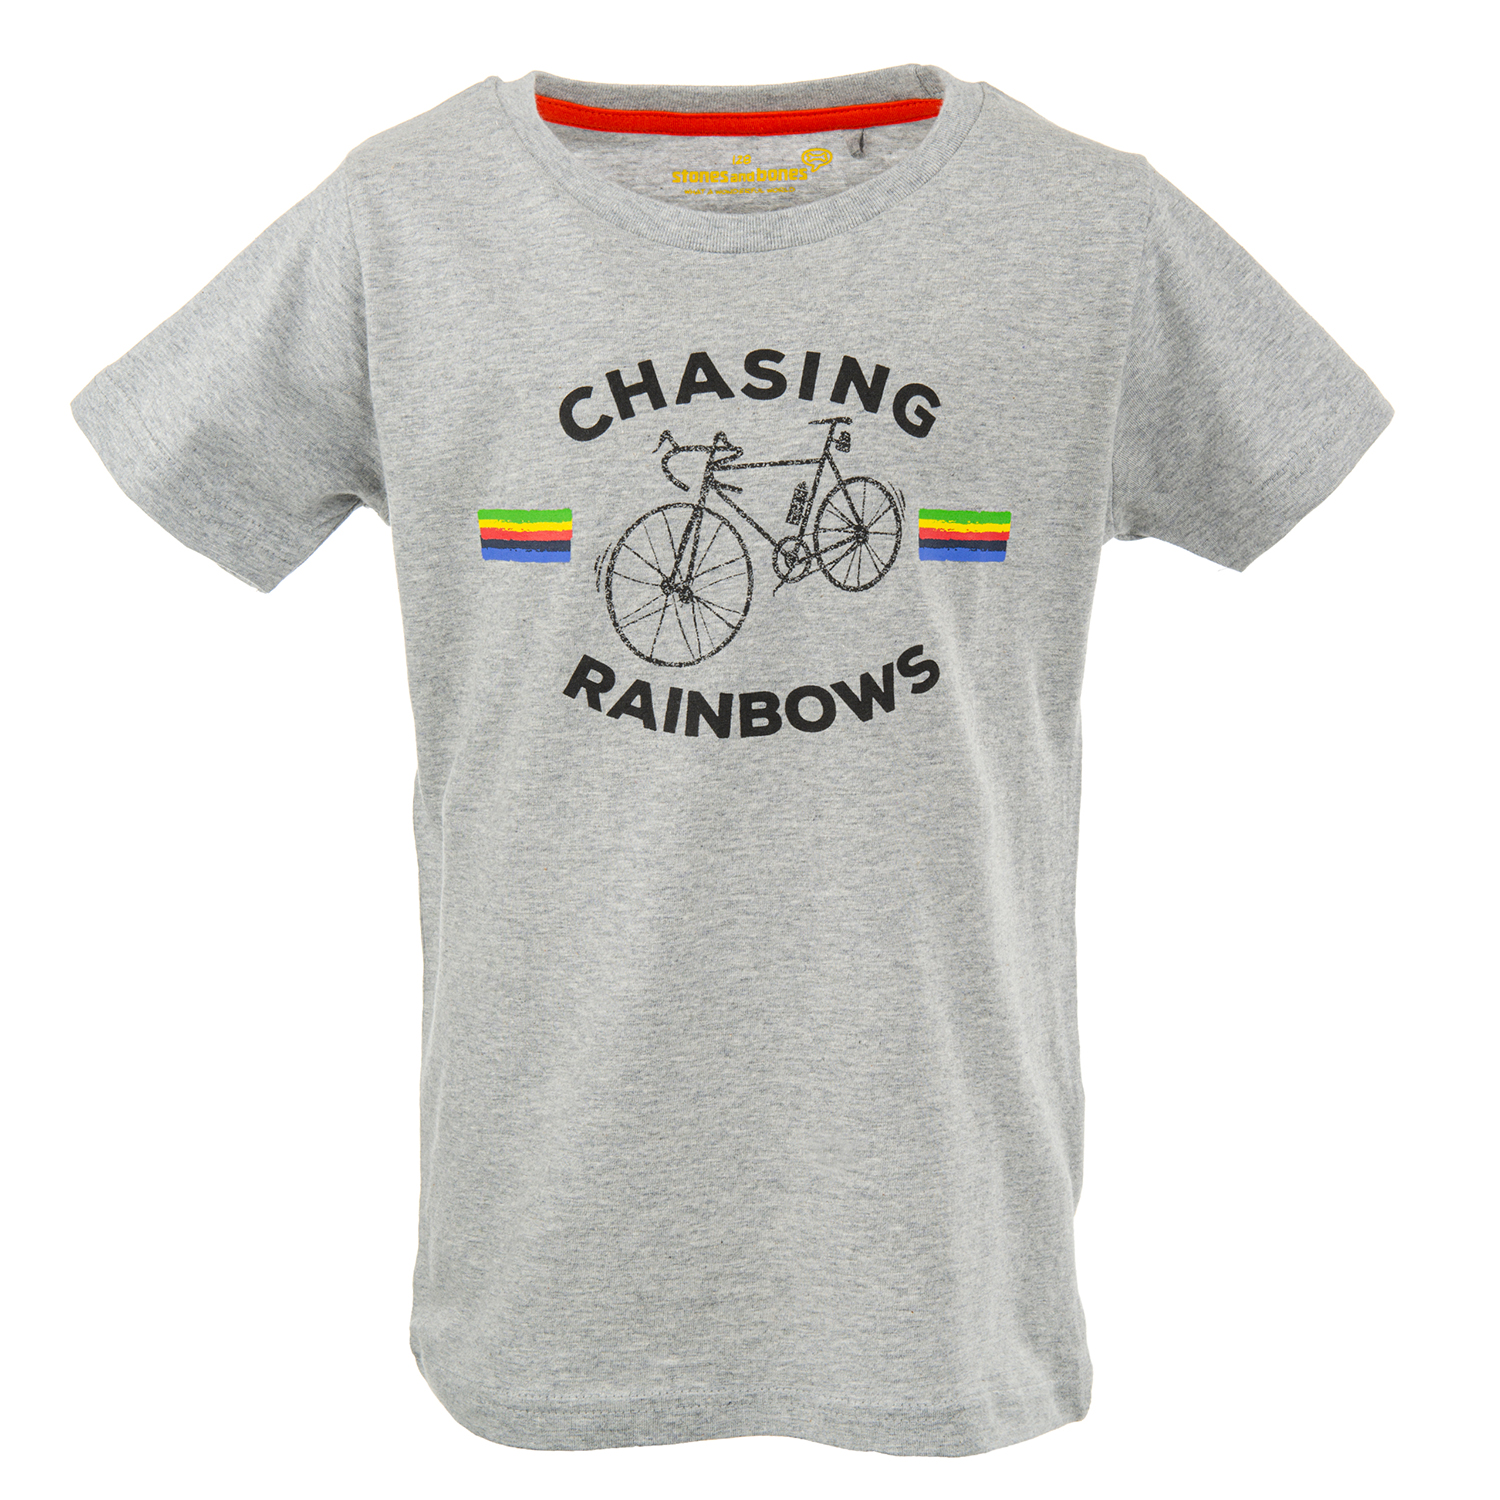 Russell - CHASING RAINBOWS m.grey